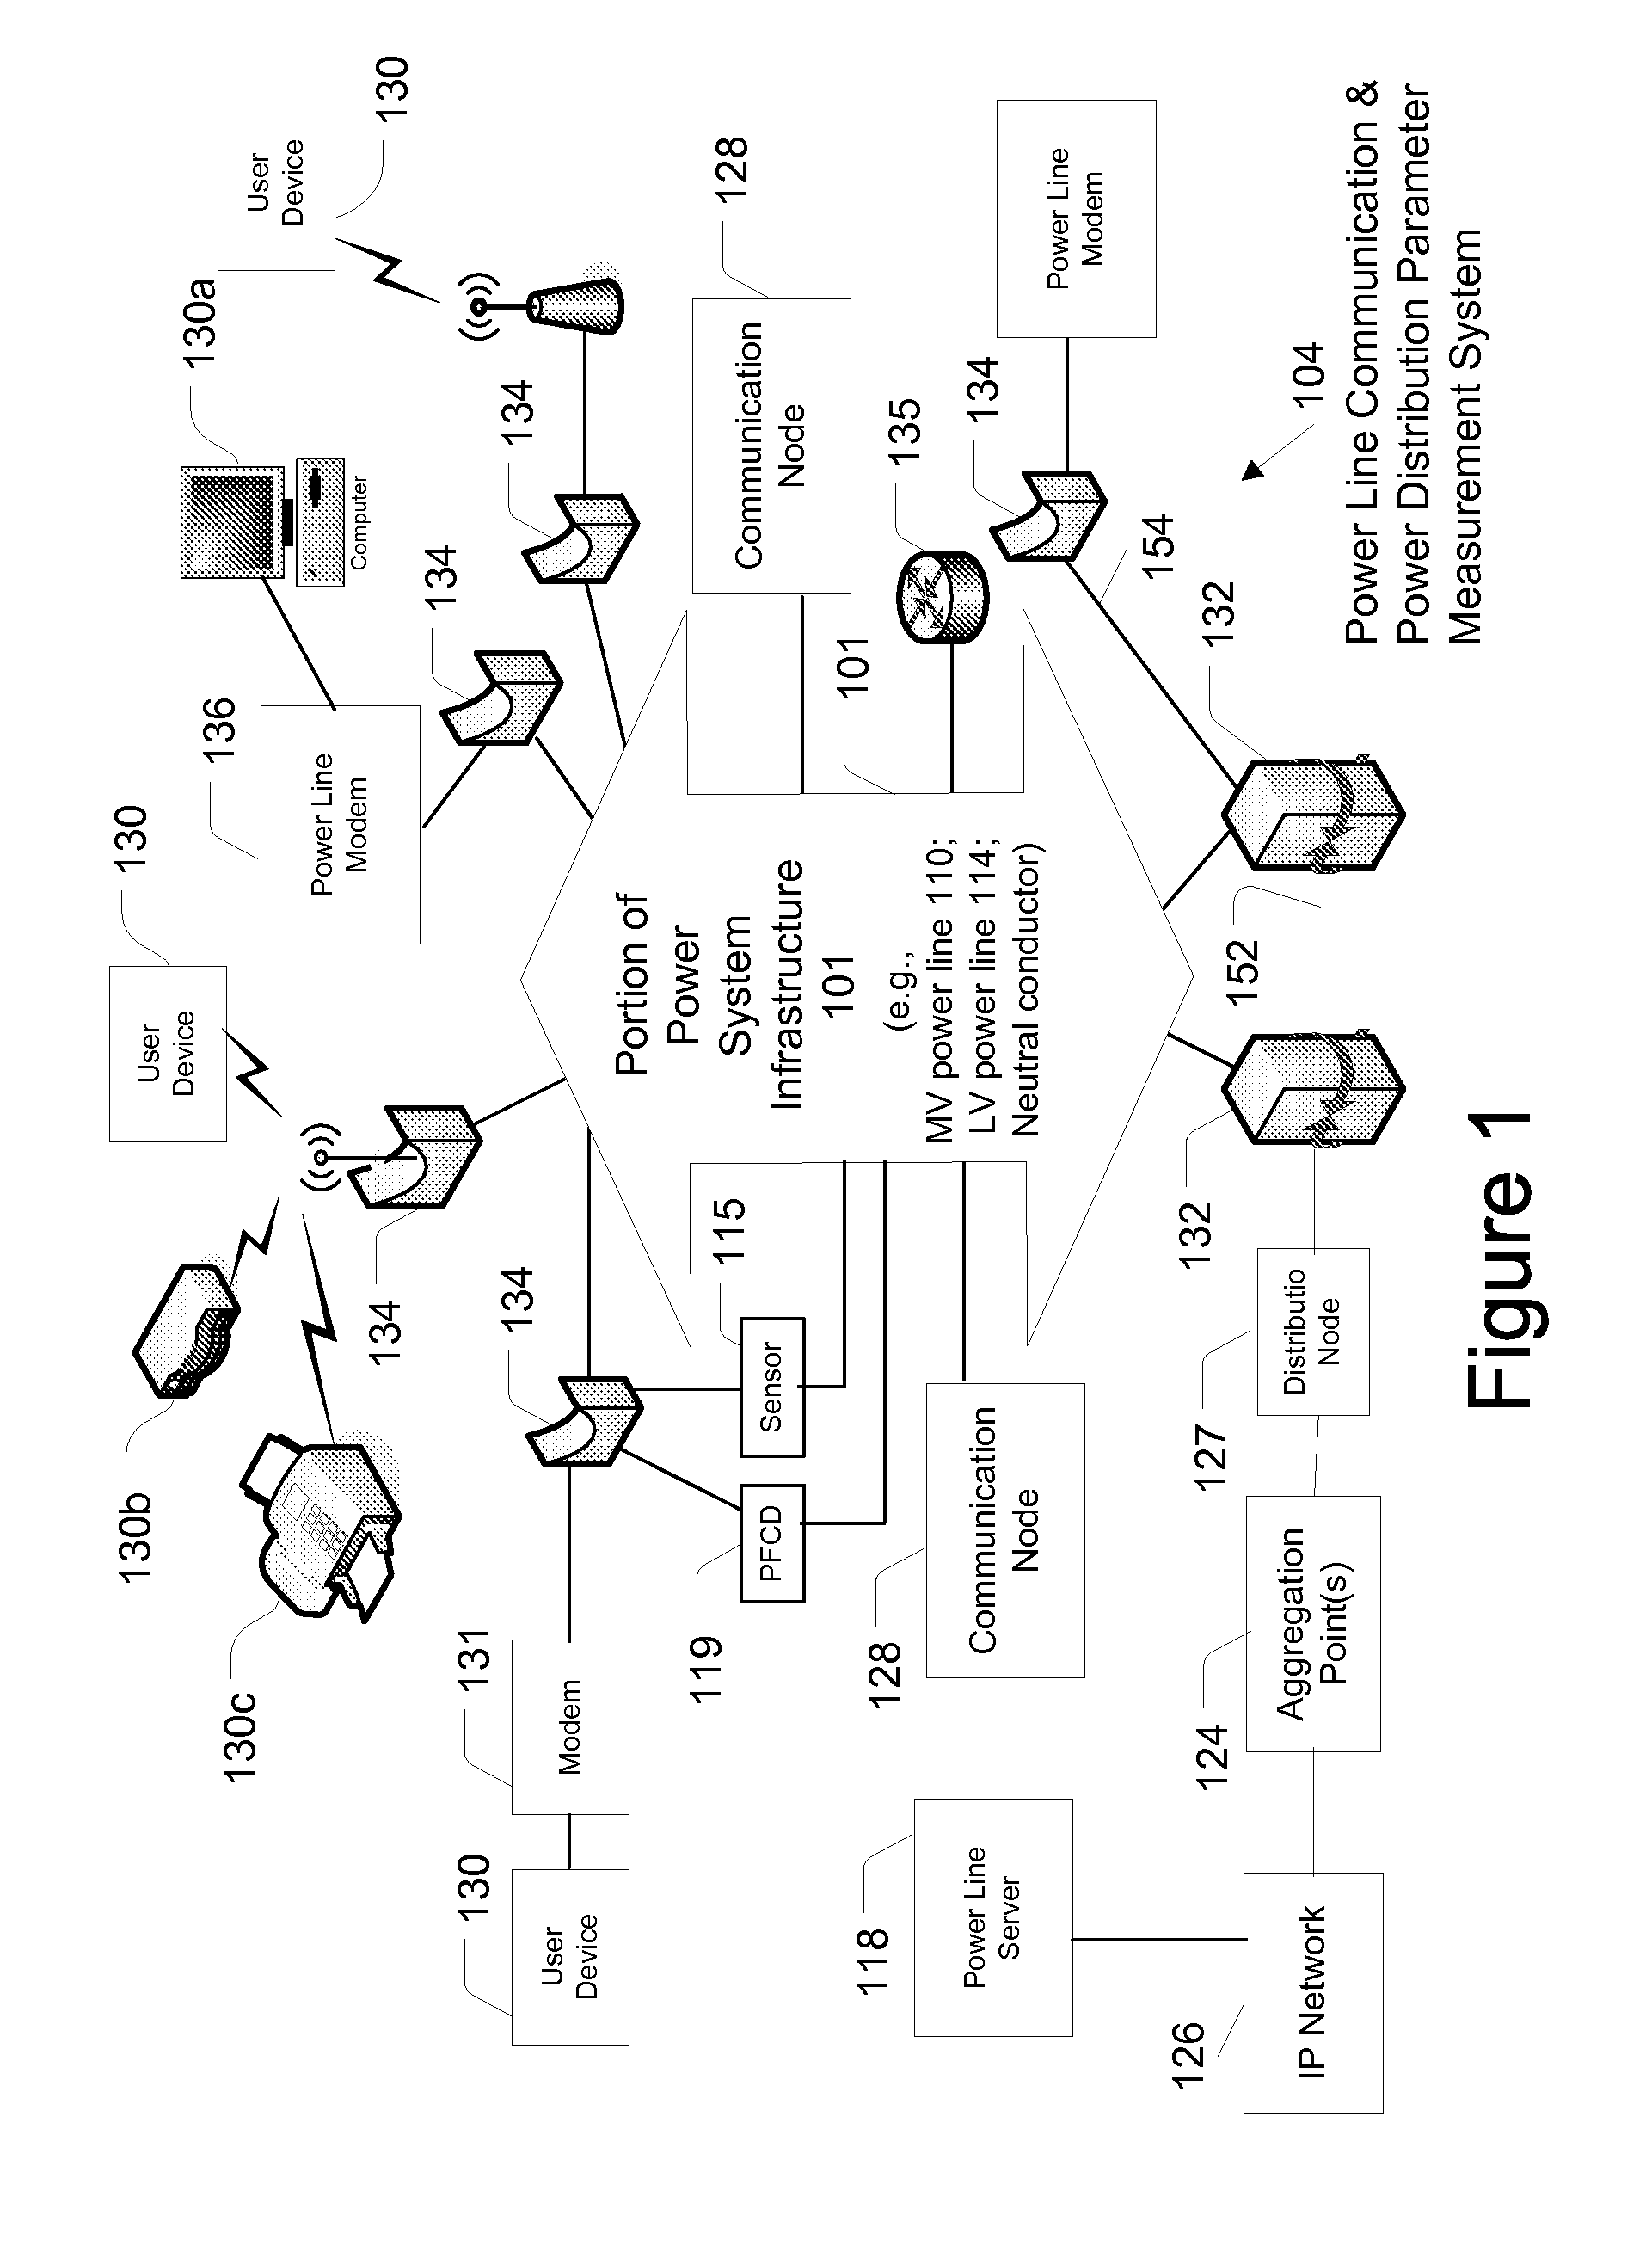 Method and system for providing power factor correction in a power distribution system